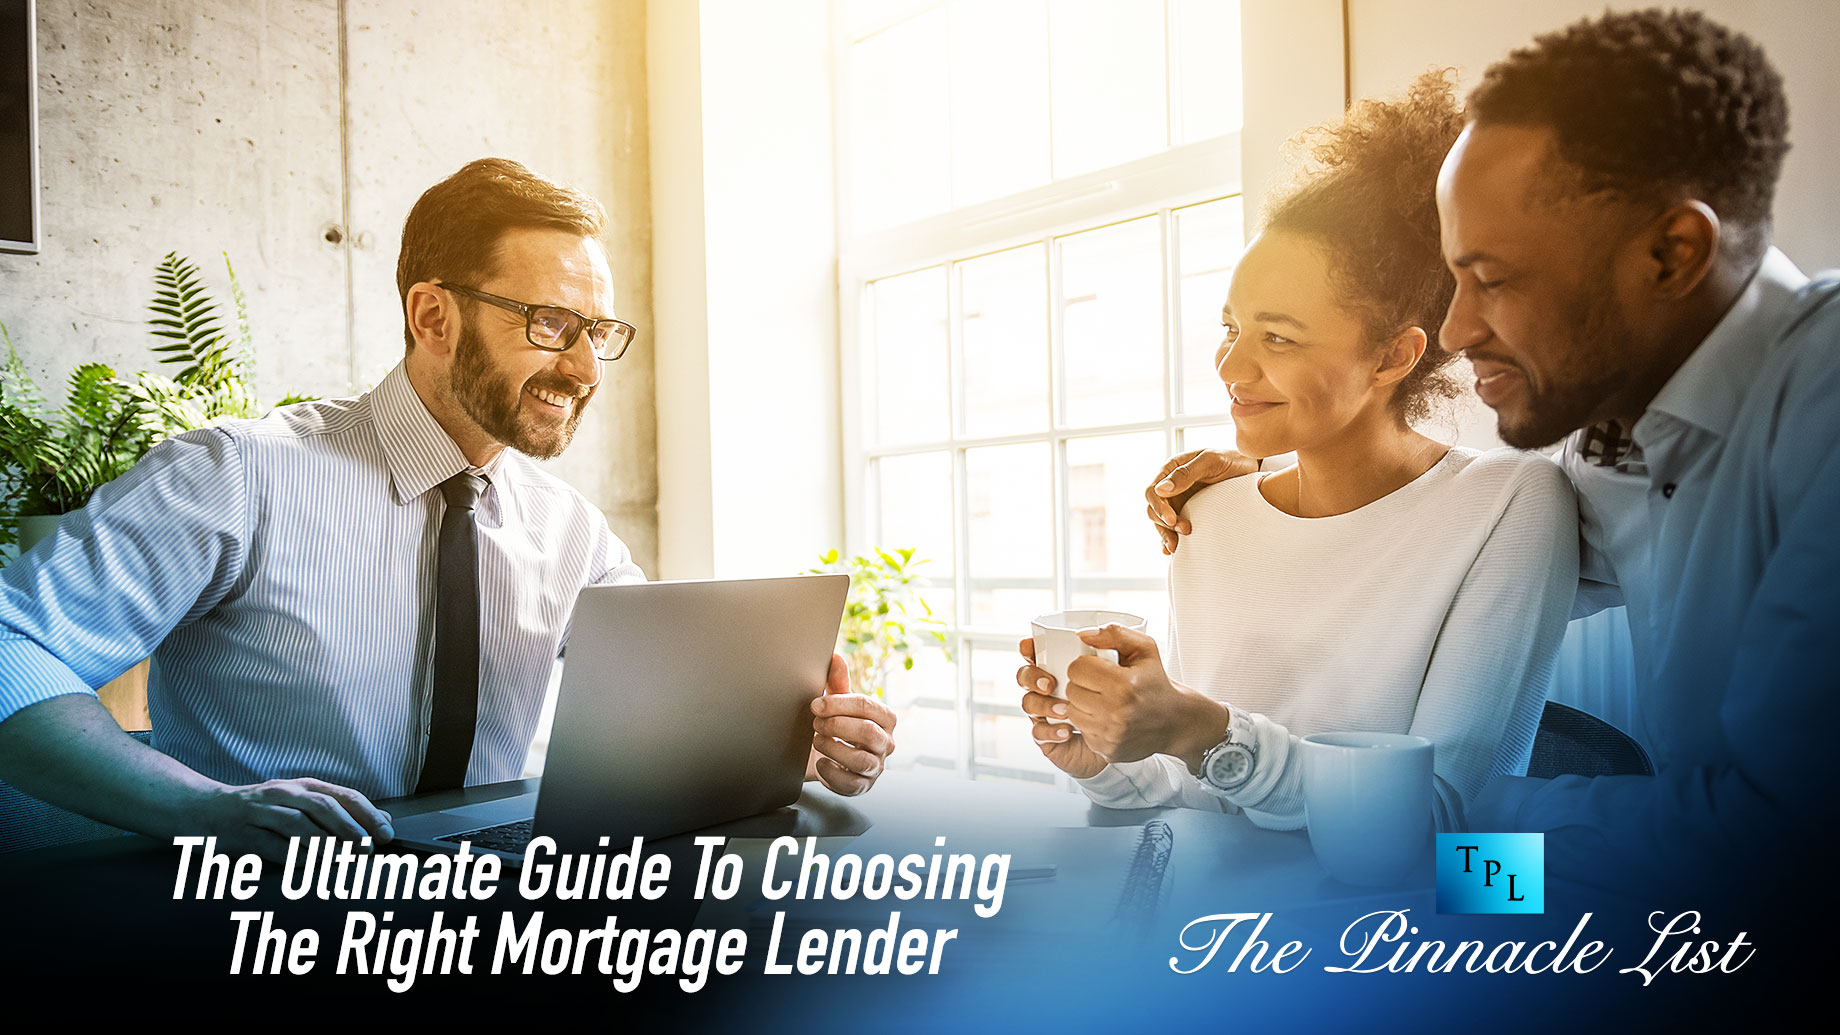 The Ultimate Guide To Choosing The Right Mortgage Lender